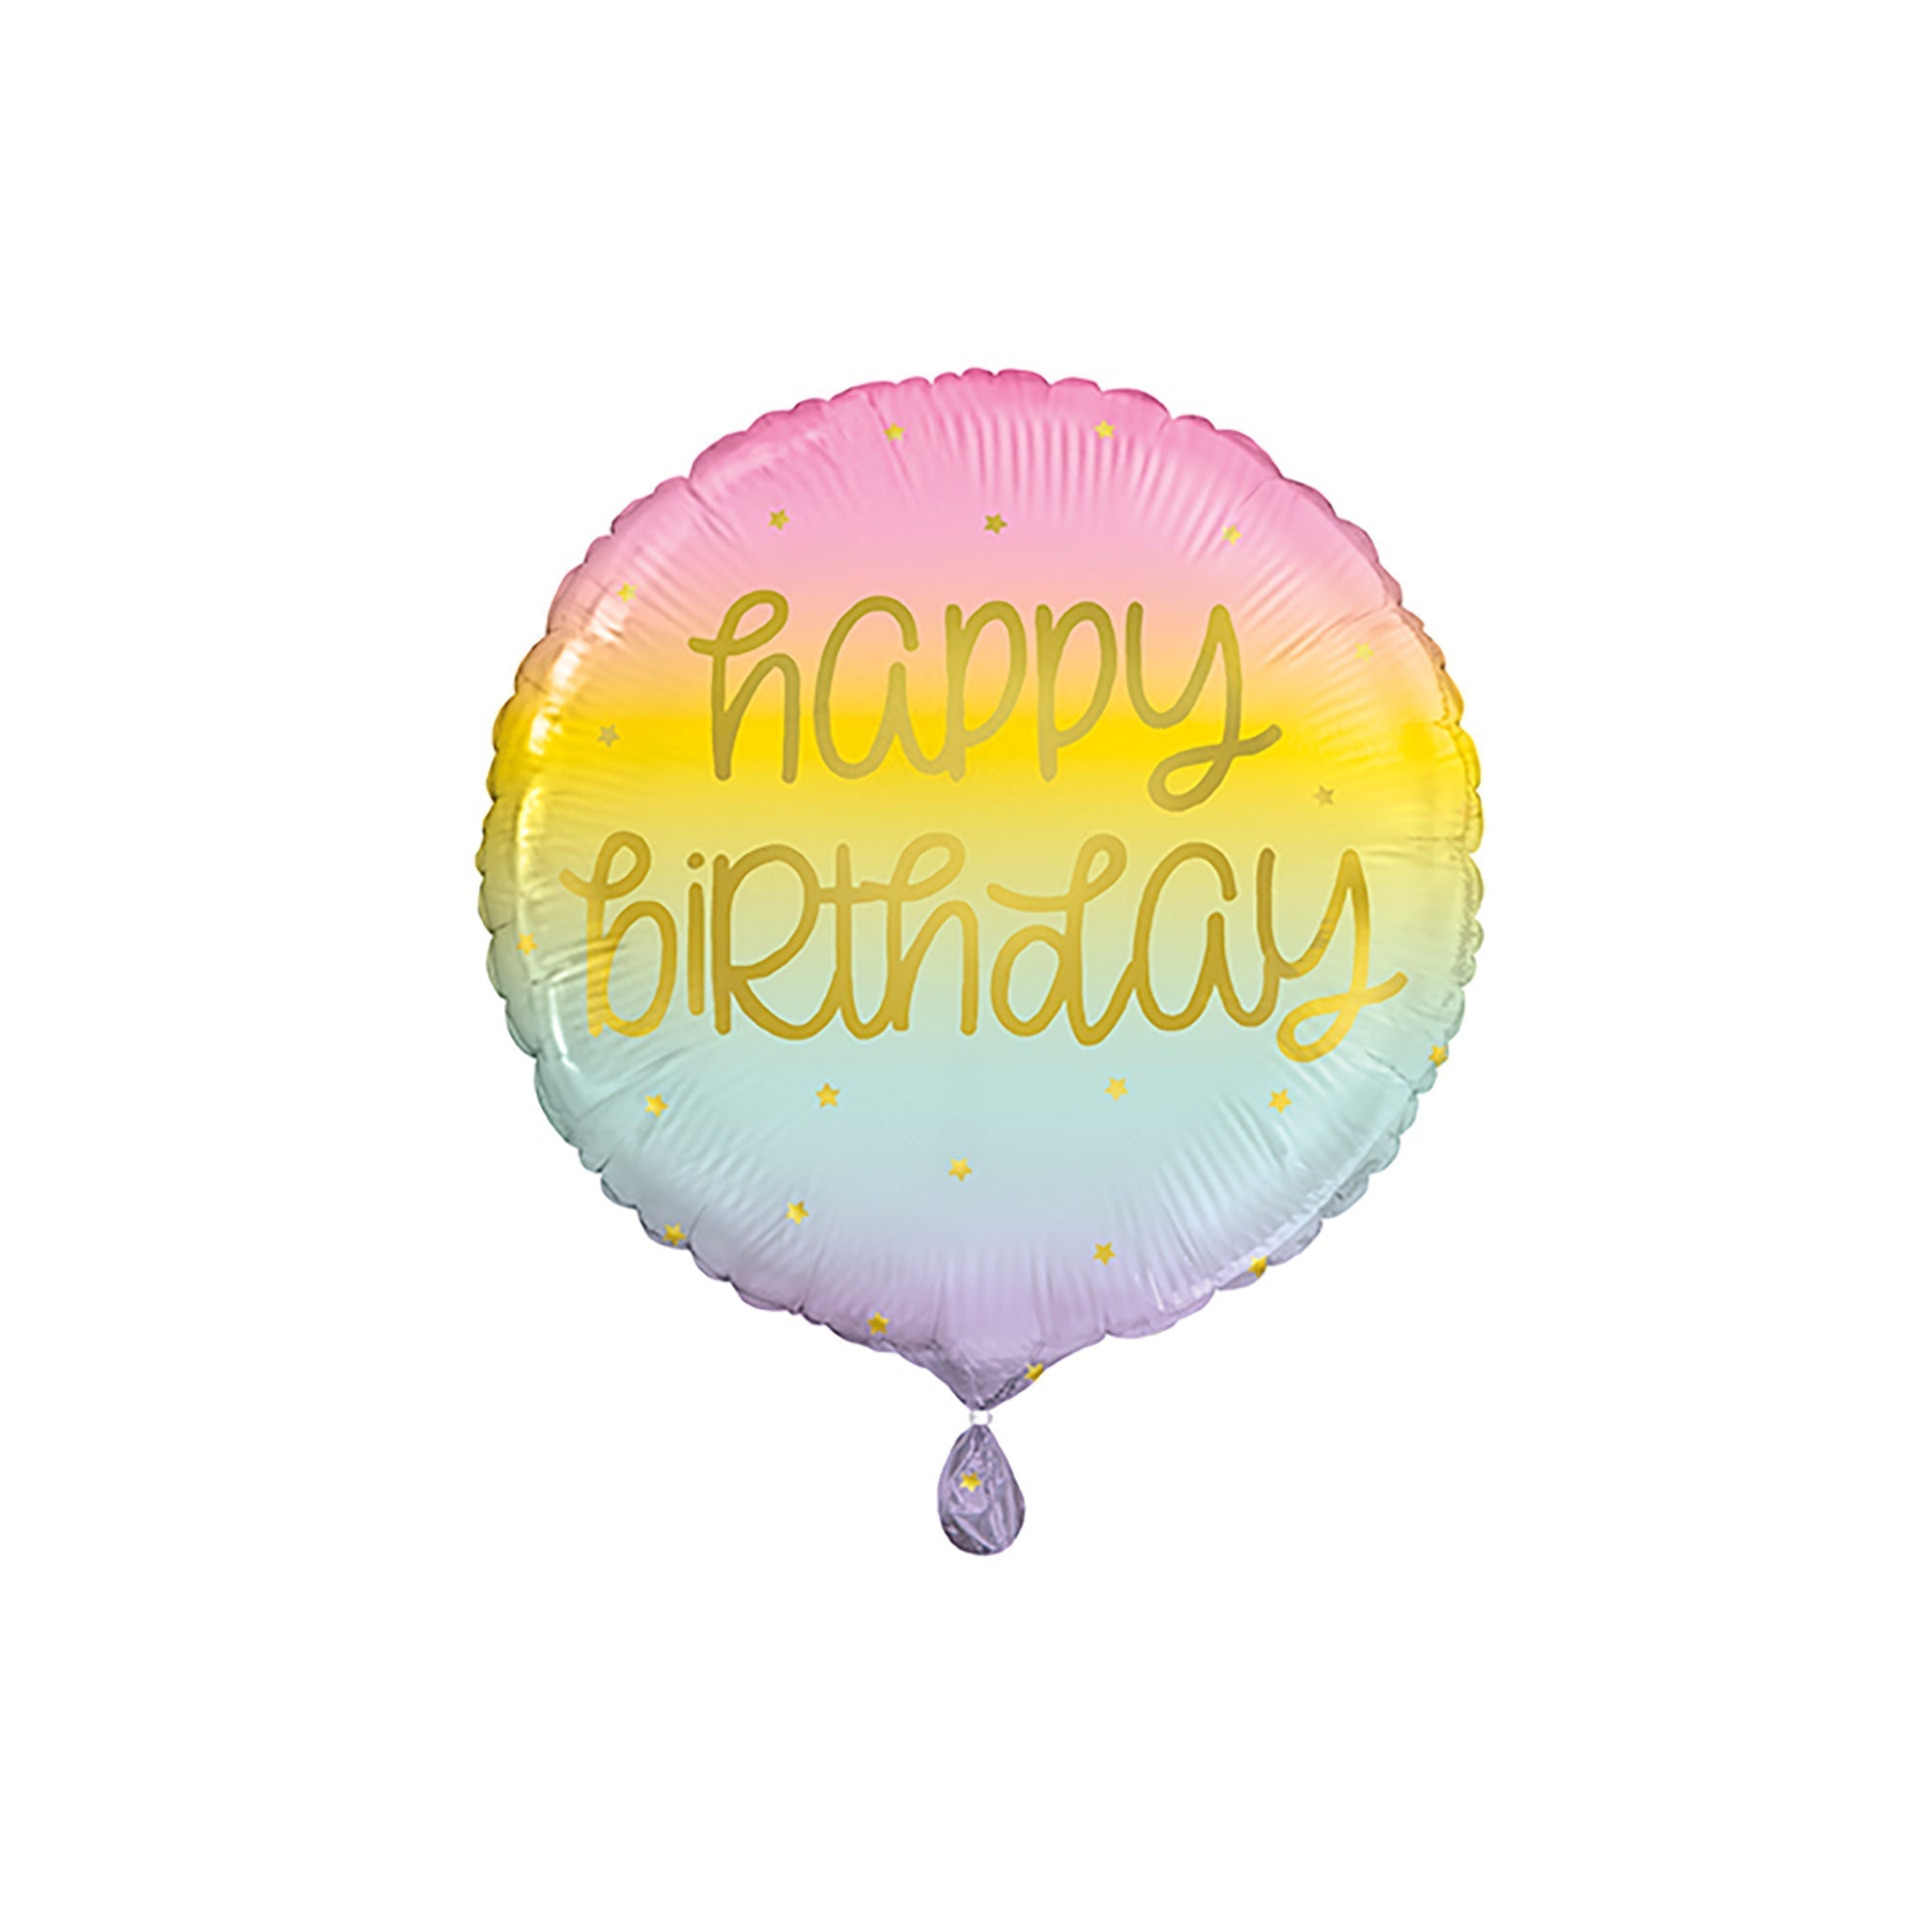 Happy Birthday Round Foil Balloon, Pastel & Gold, 18 Inches, 1 Count